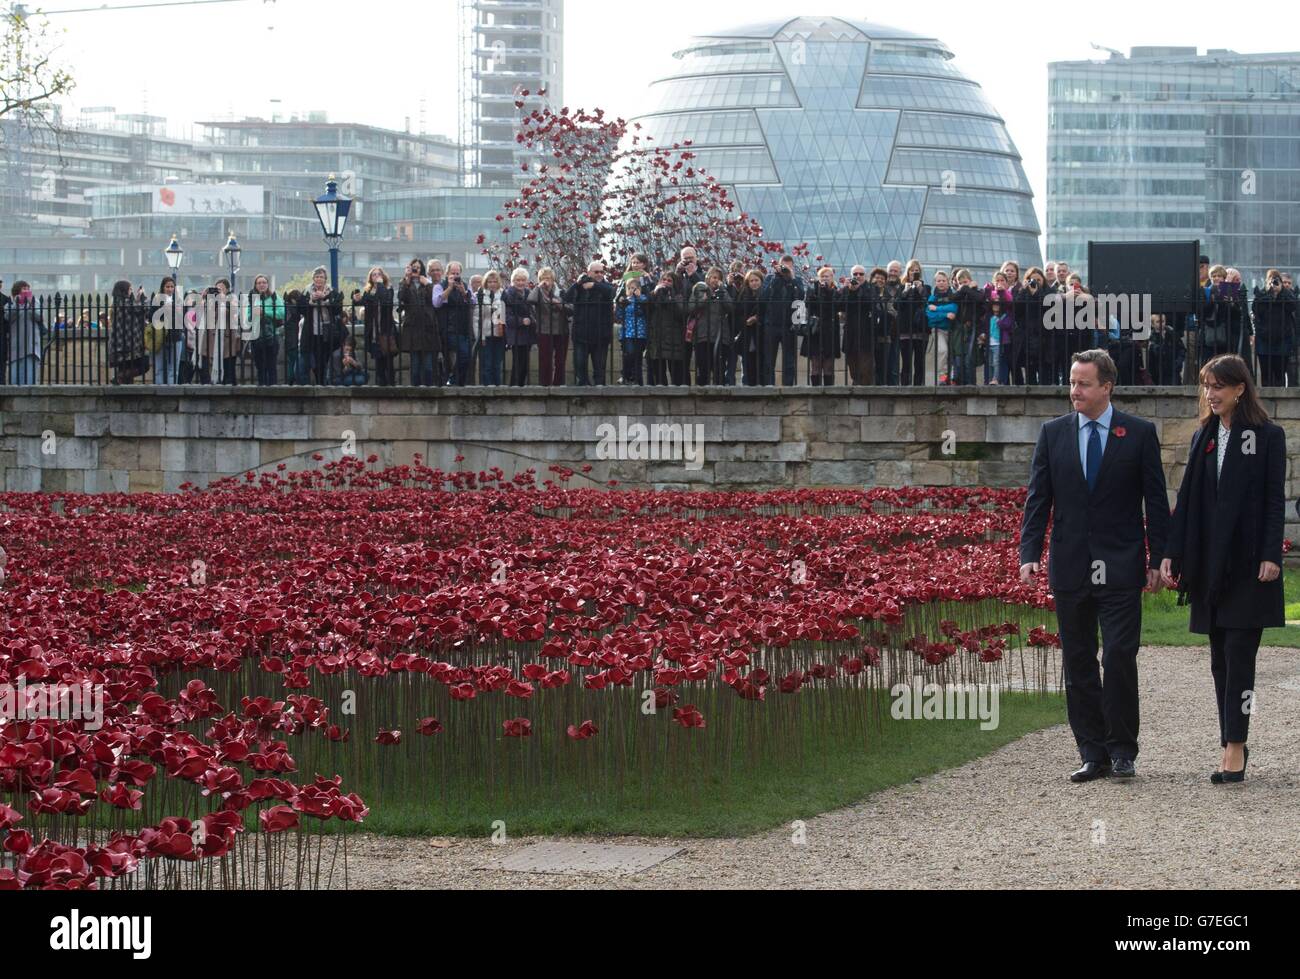 Prime Minister David Cameron and his wife Samantha arrive at the Tower of London to each lay a poppy at the art installation 'Blood Swept Lands and Seas of Red' by artist Paul Cummins which marks the centenary of the First World War. Stock Photo